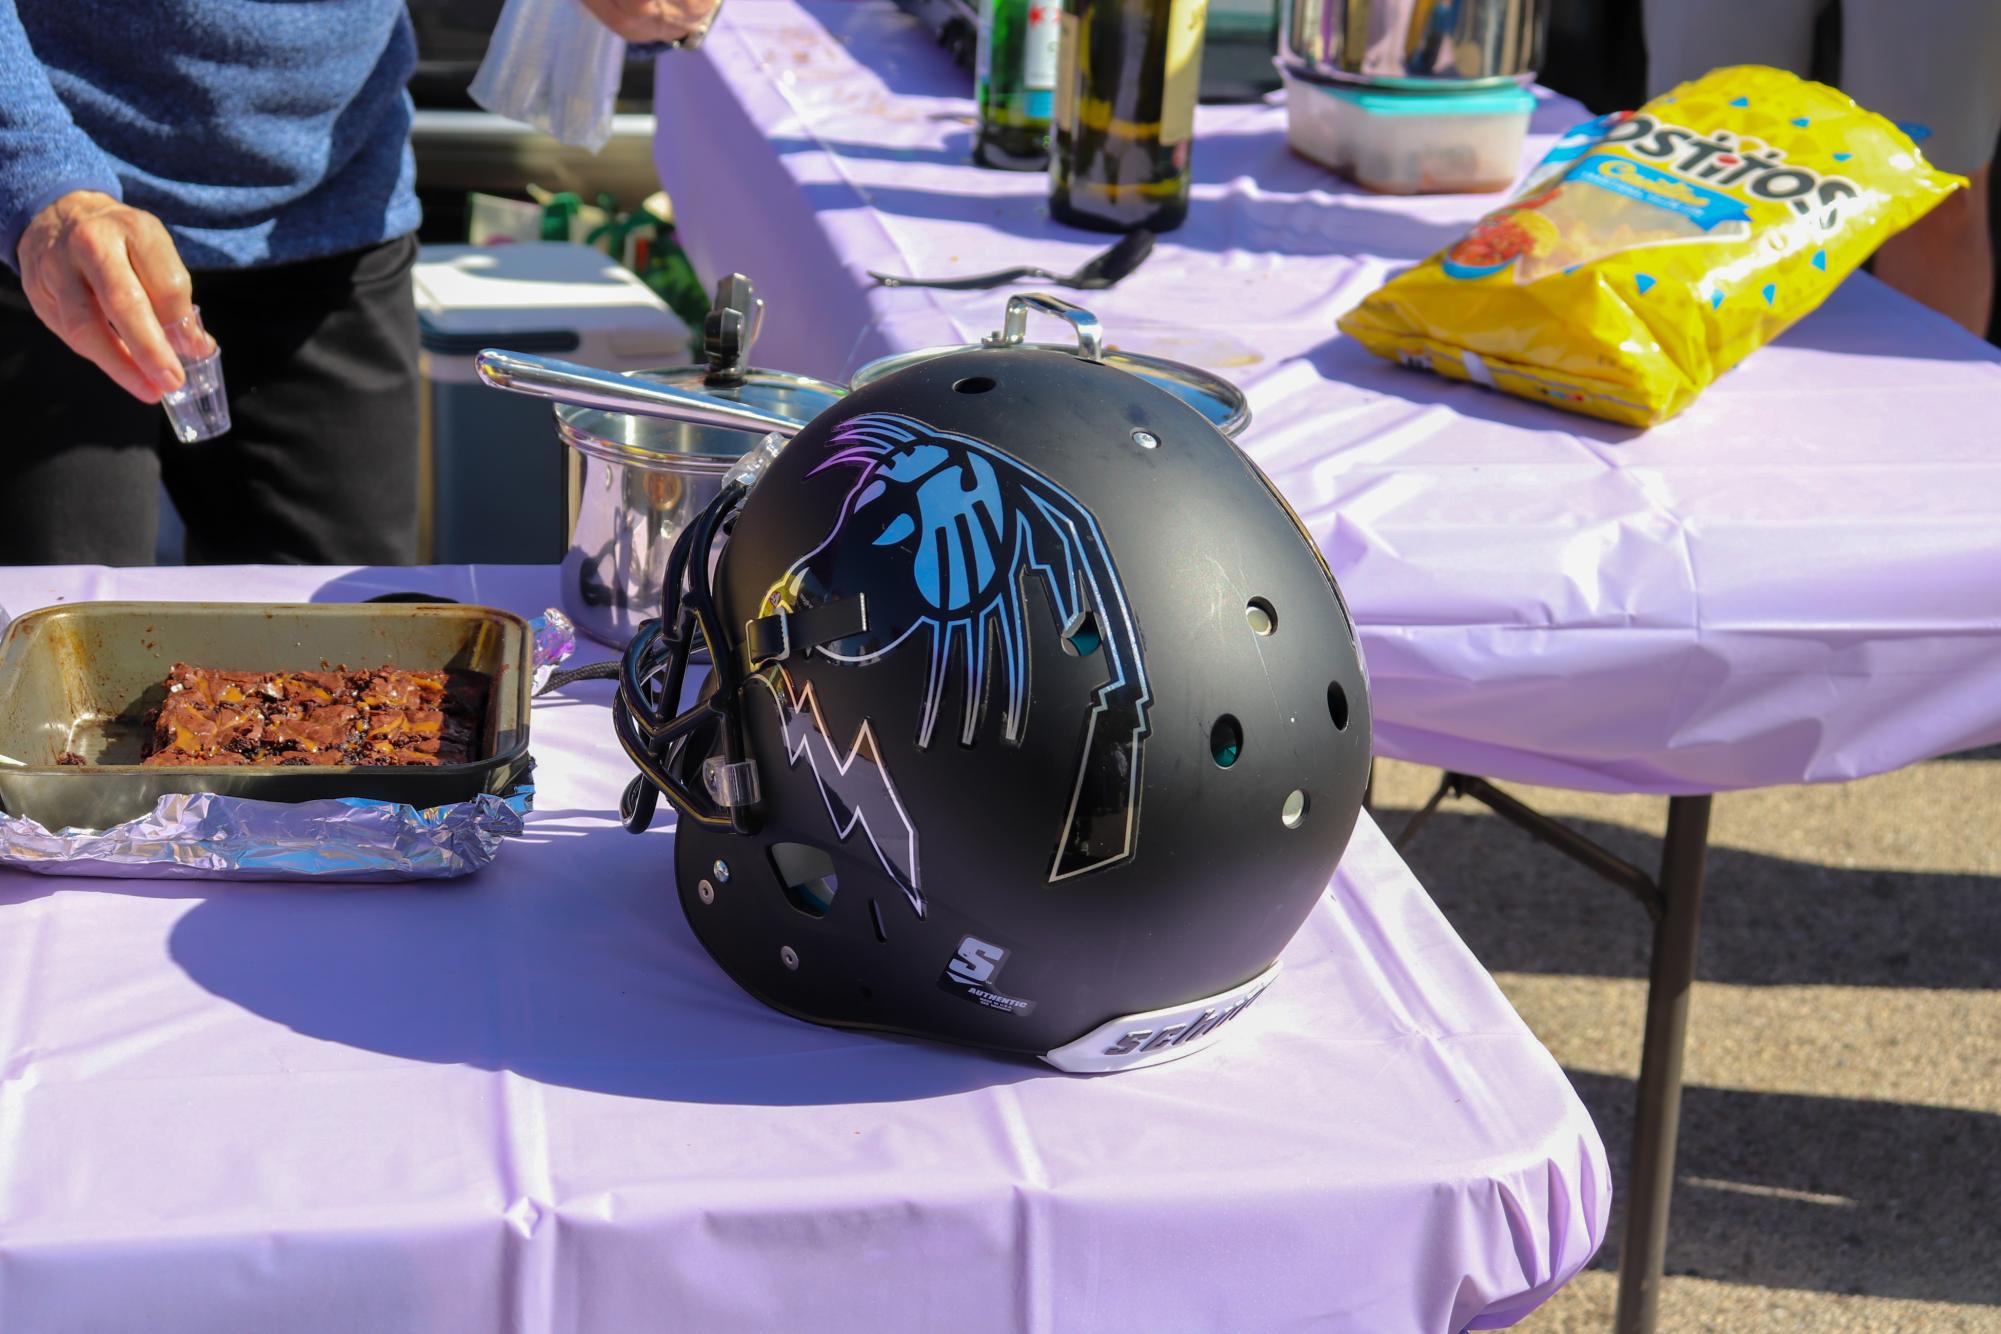 A black Northwestern helmet with a metallic wildcat decal sits on a snack table with purple tablecloth.